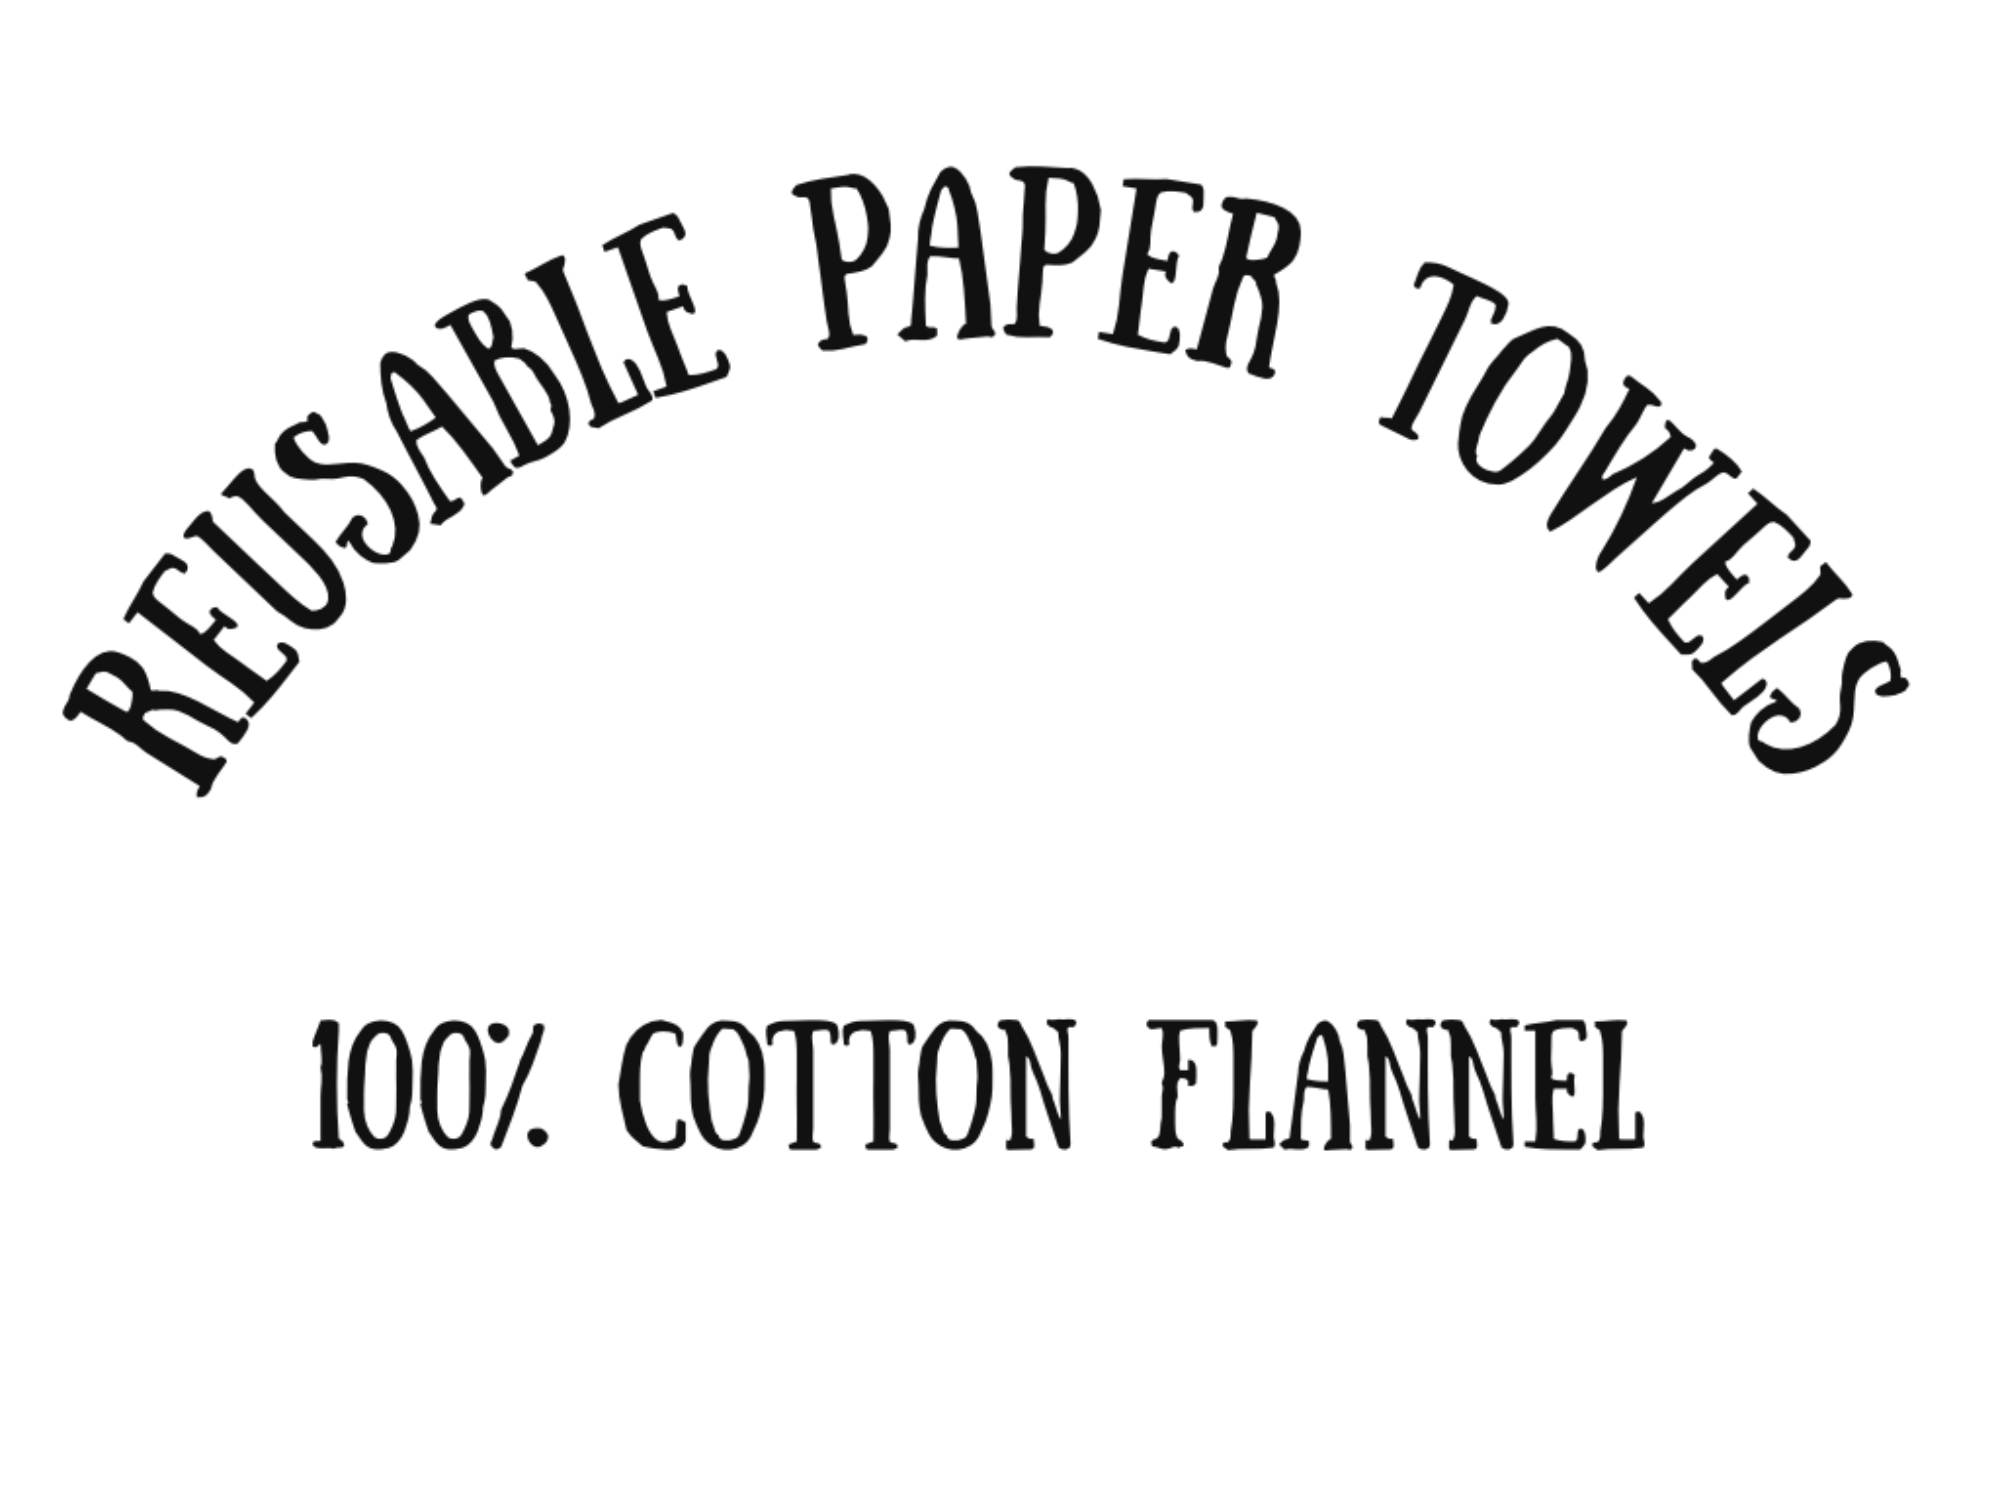 Non Paper Towels Large 10x12 Full size Sheets Set of 6  - Smoky Pink Purple Gray and Black